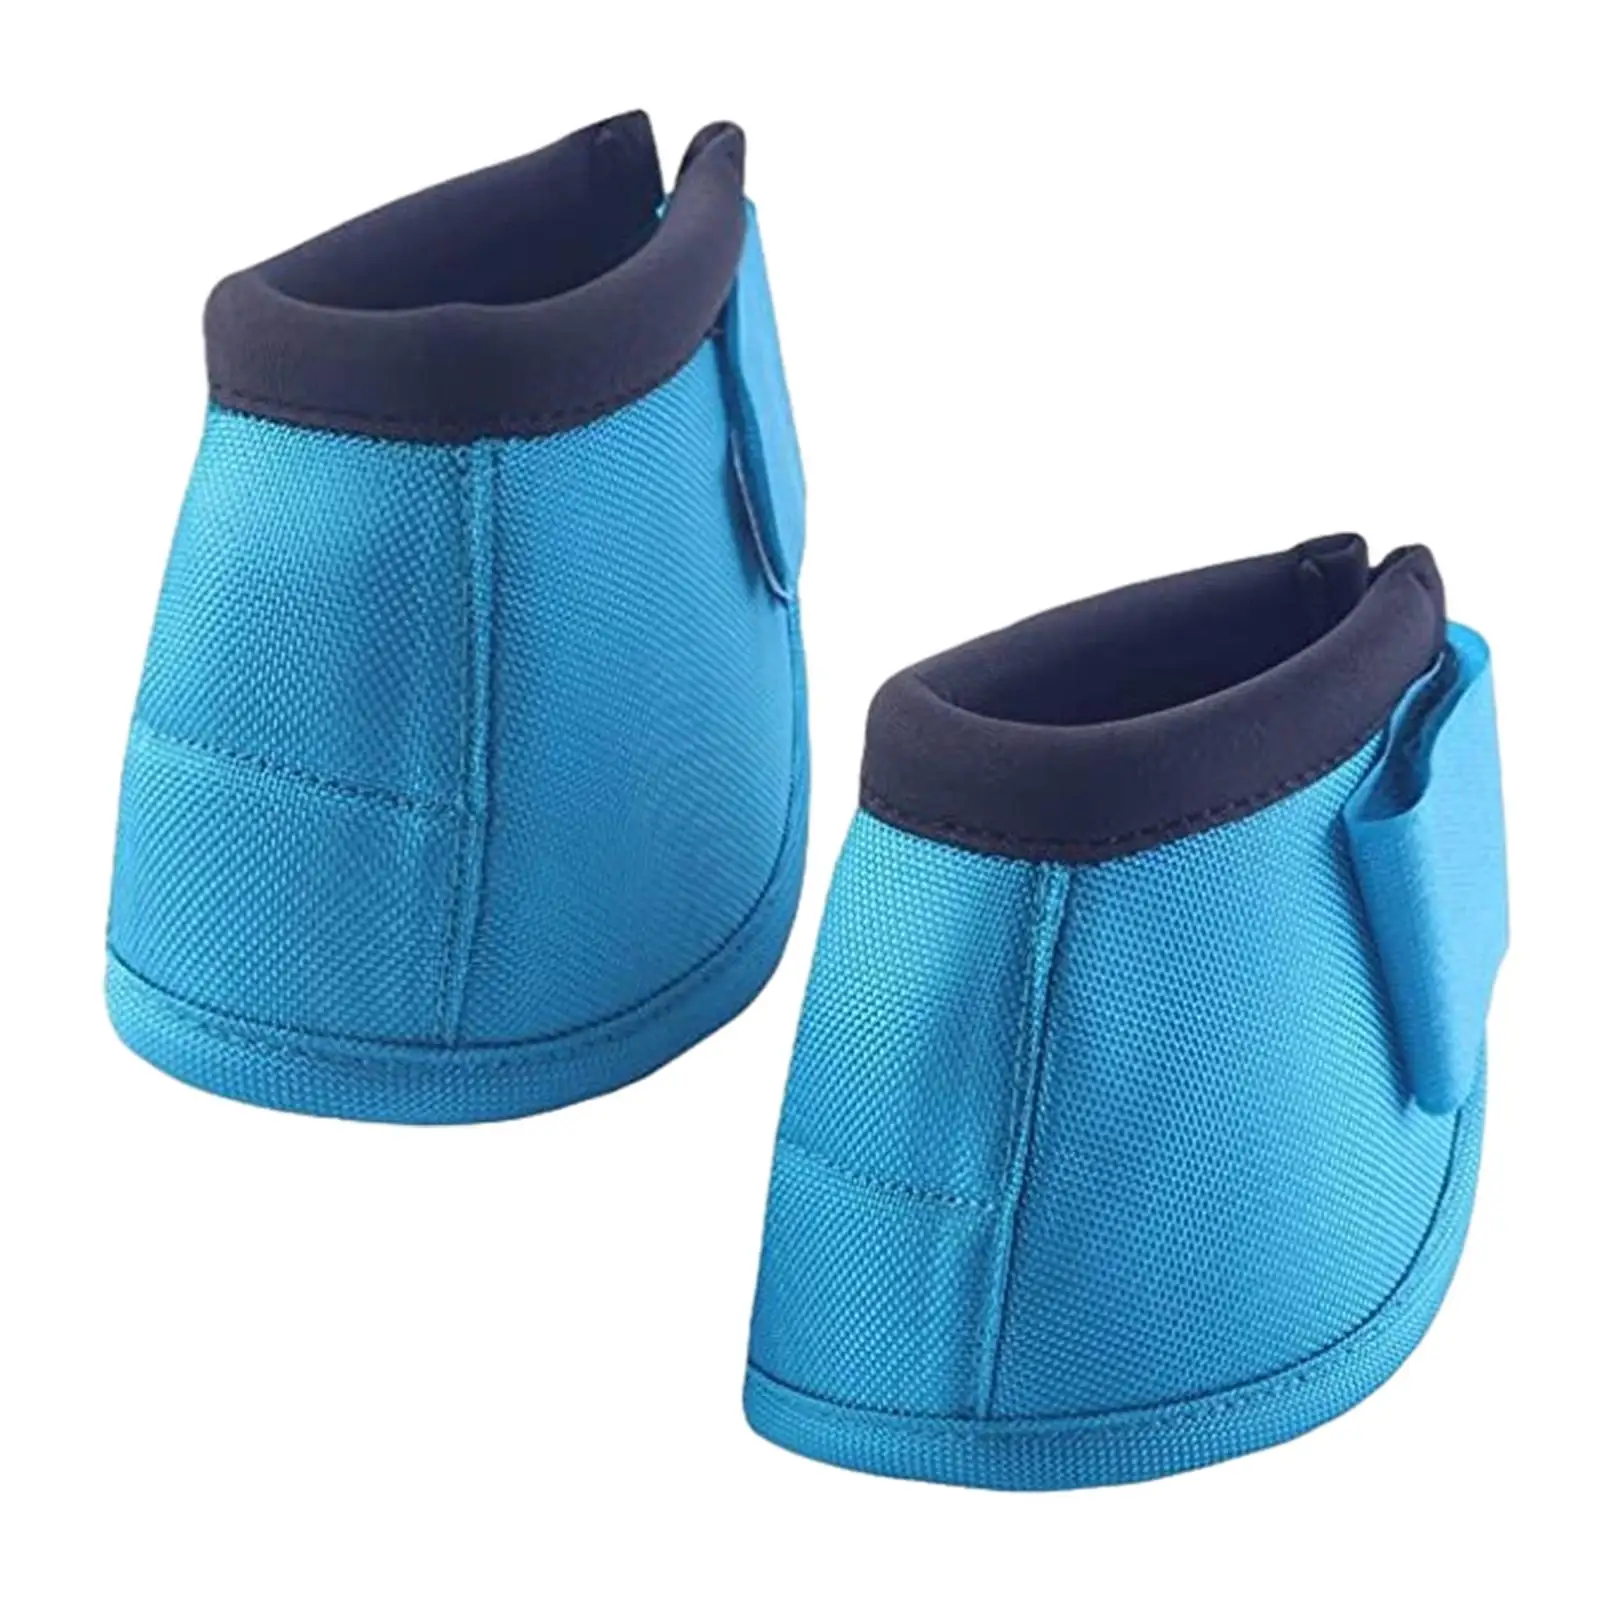 Horse Bell Boots Lightweight Portable Comfortable Sold in Pairs Shock Absorbing Durable Guard Protective Equestrian Equipment